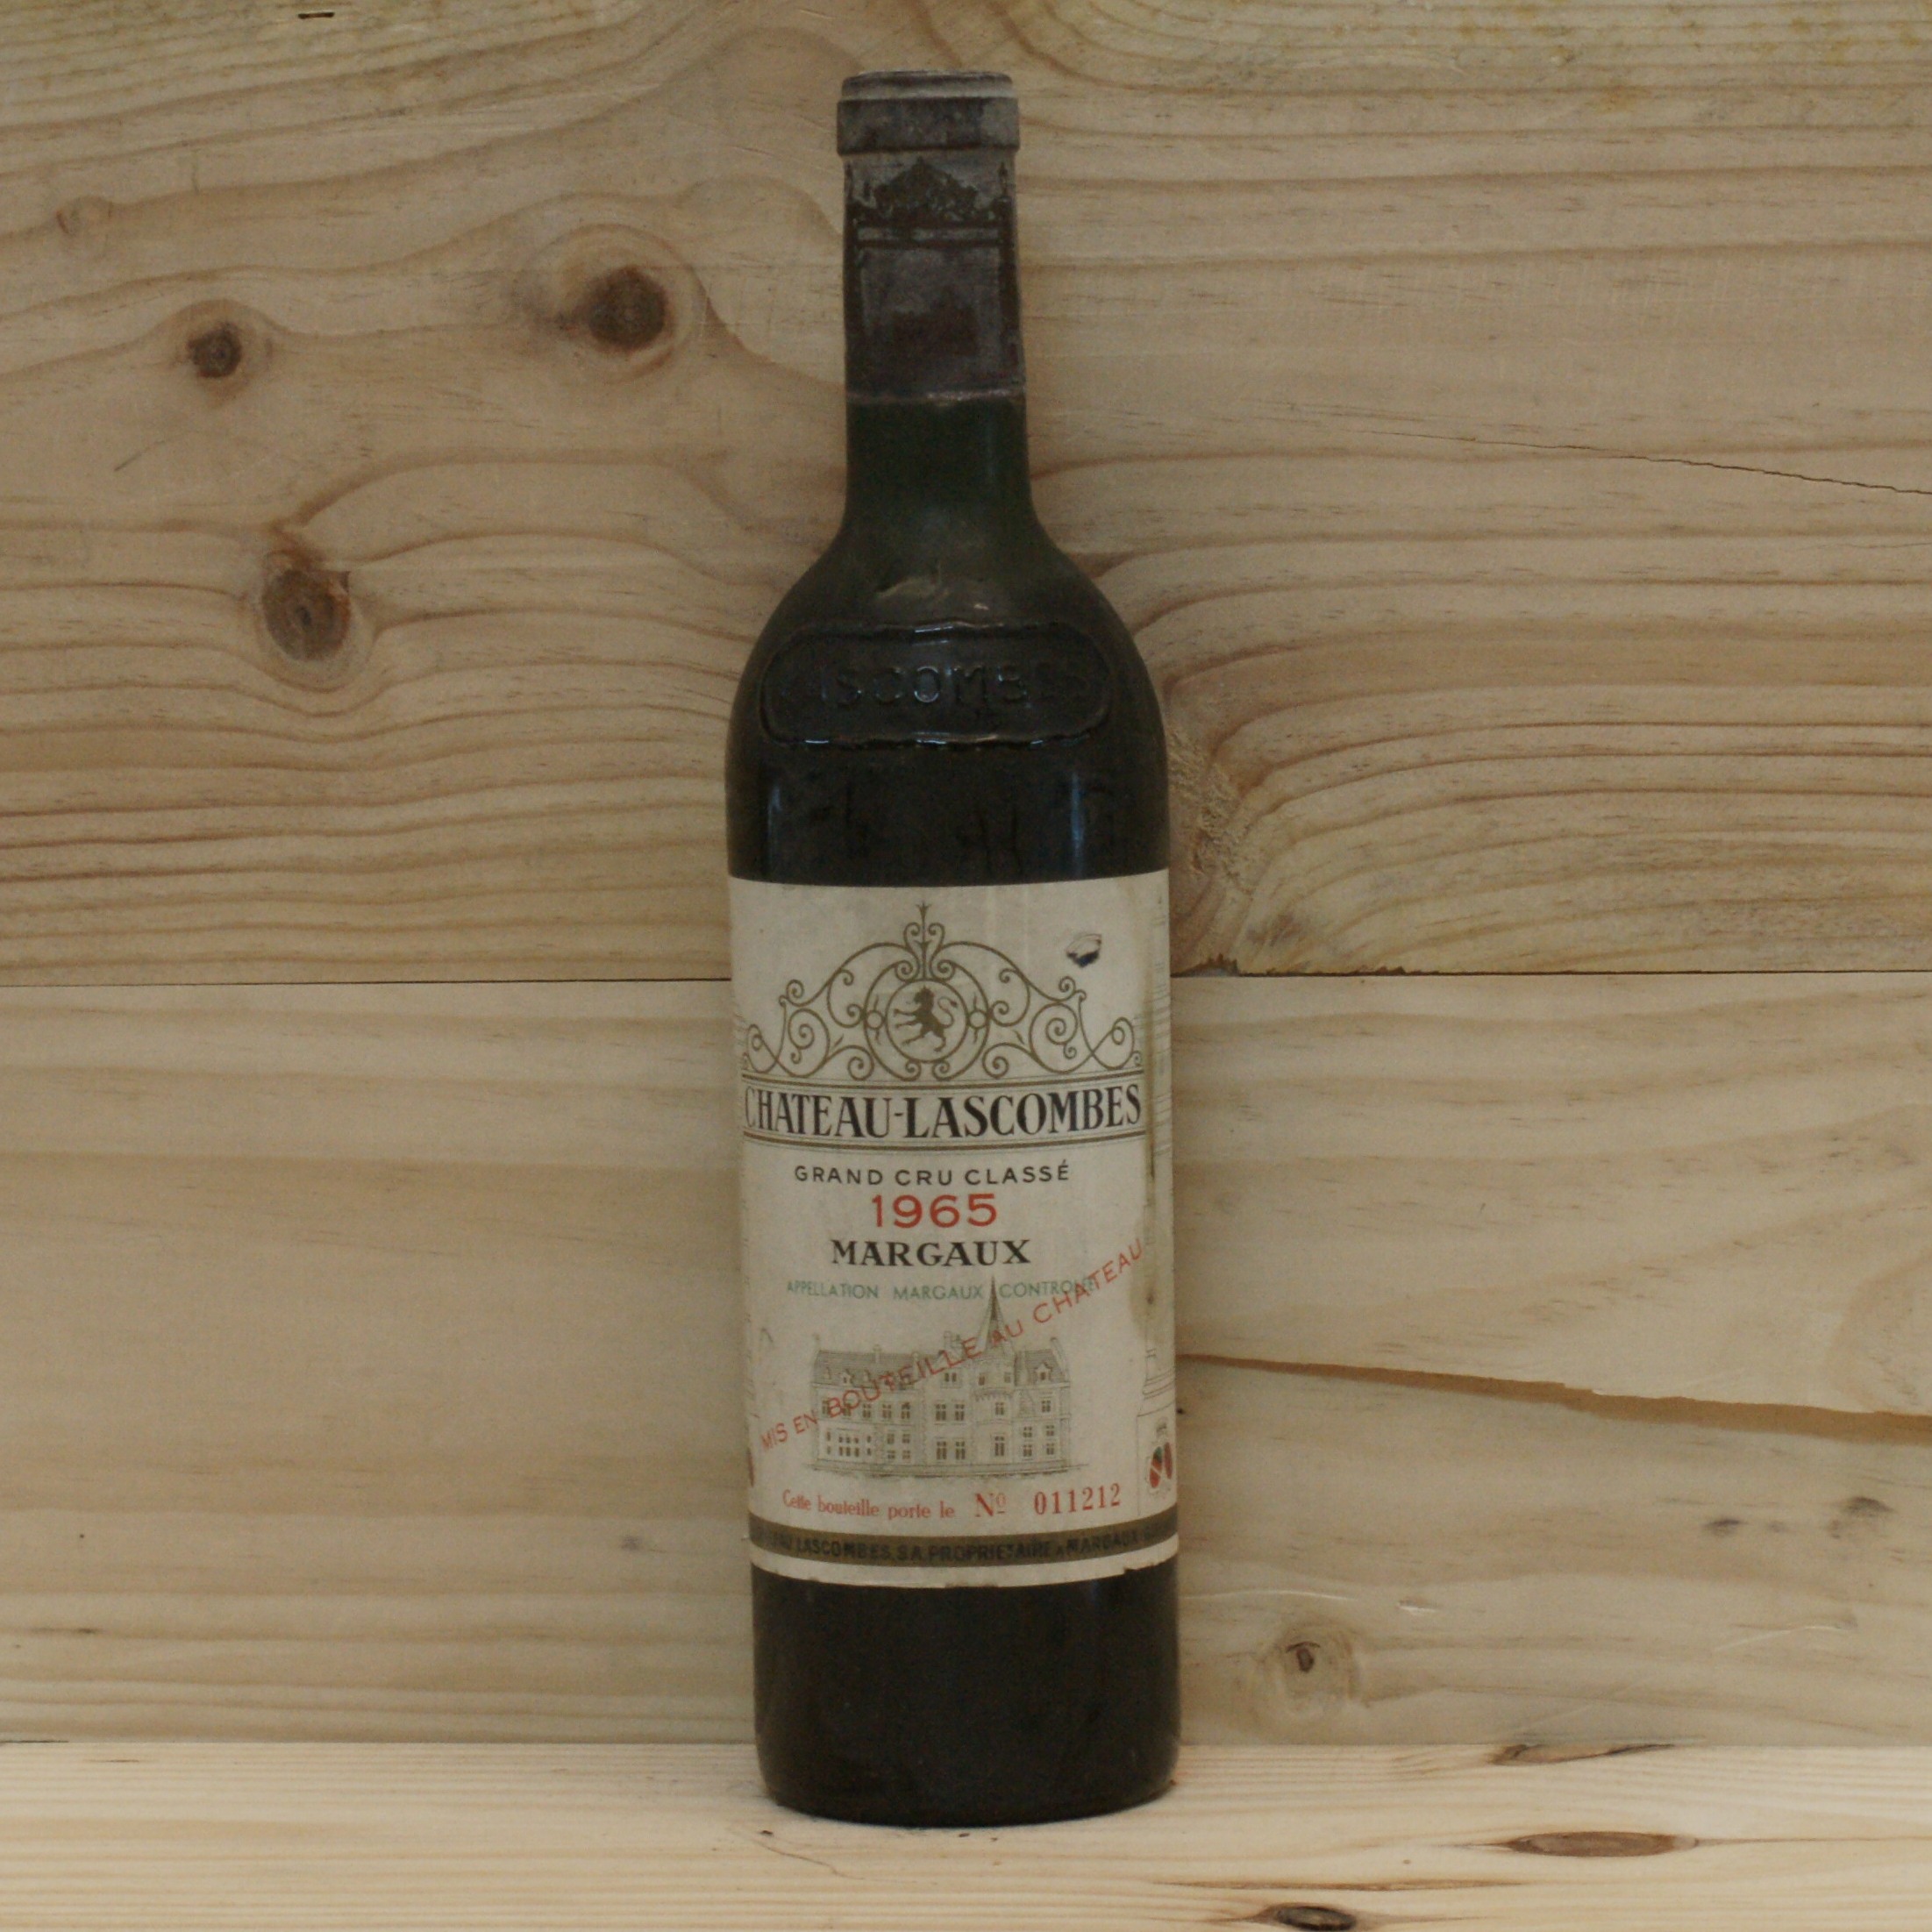 1965 Chateau Lascombes